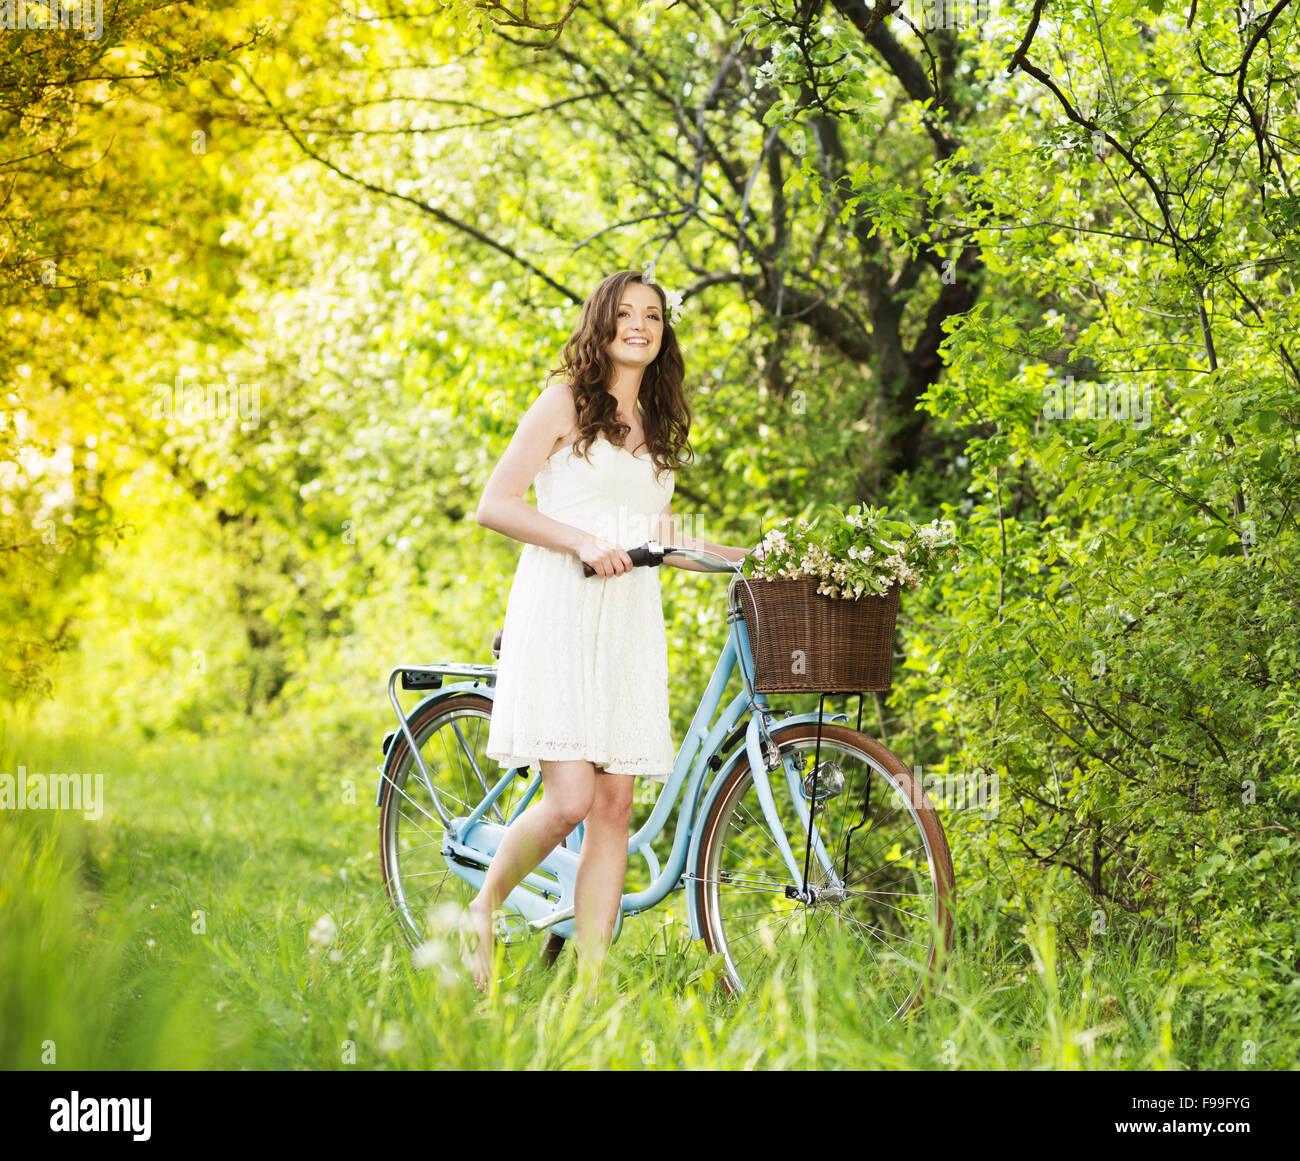 Pretty young woman with retro bike in green park Stock Photo